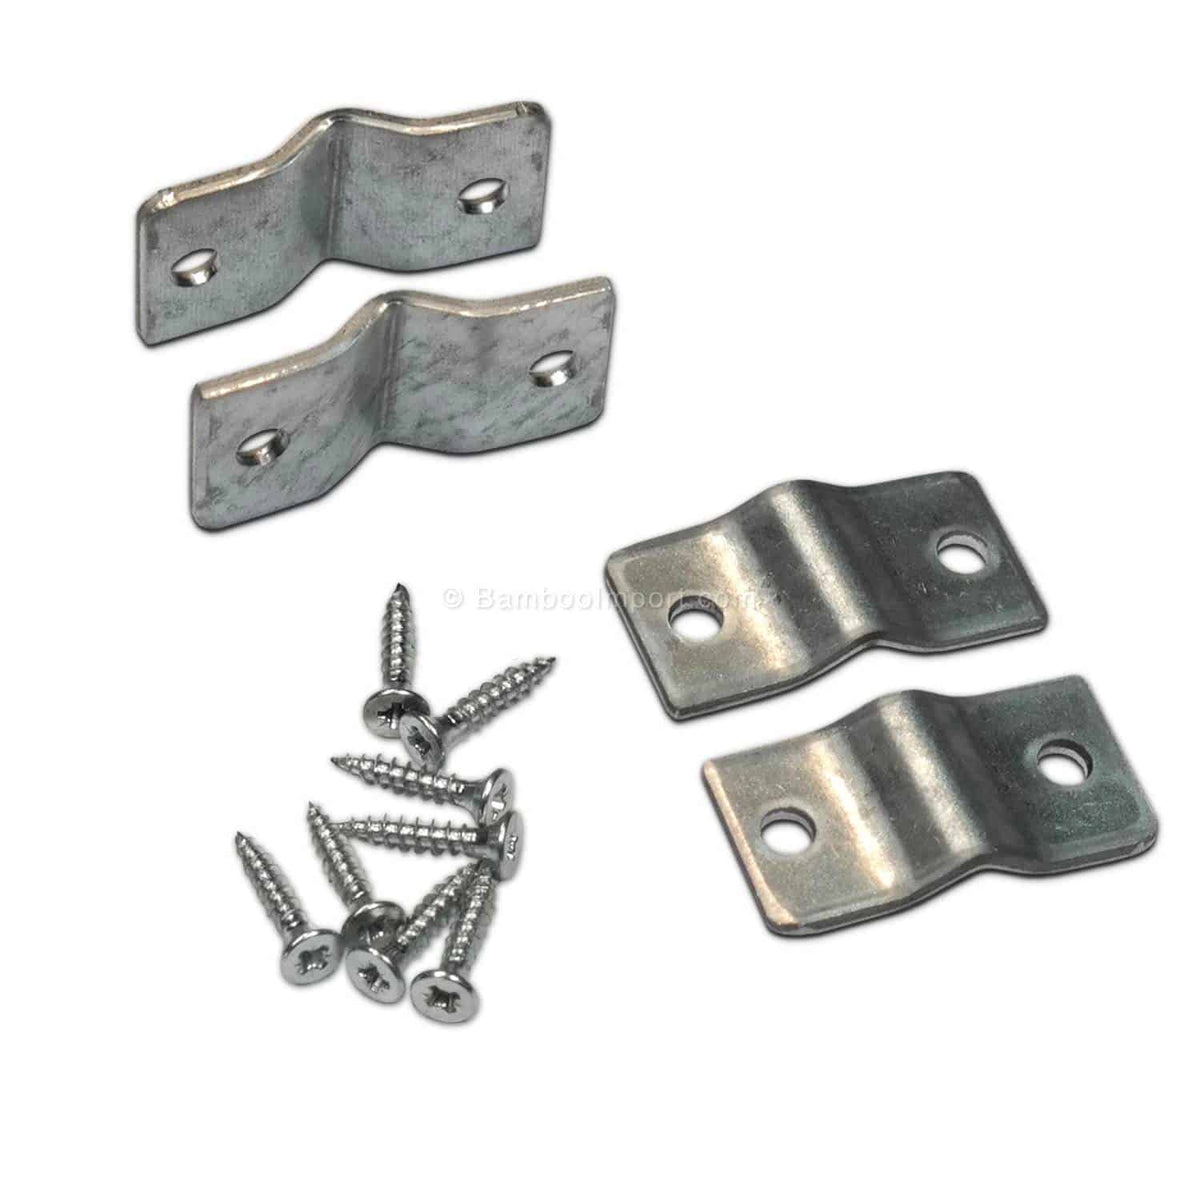 Wire mesh panel clamps Galvanised - 4 pieces